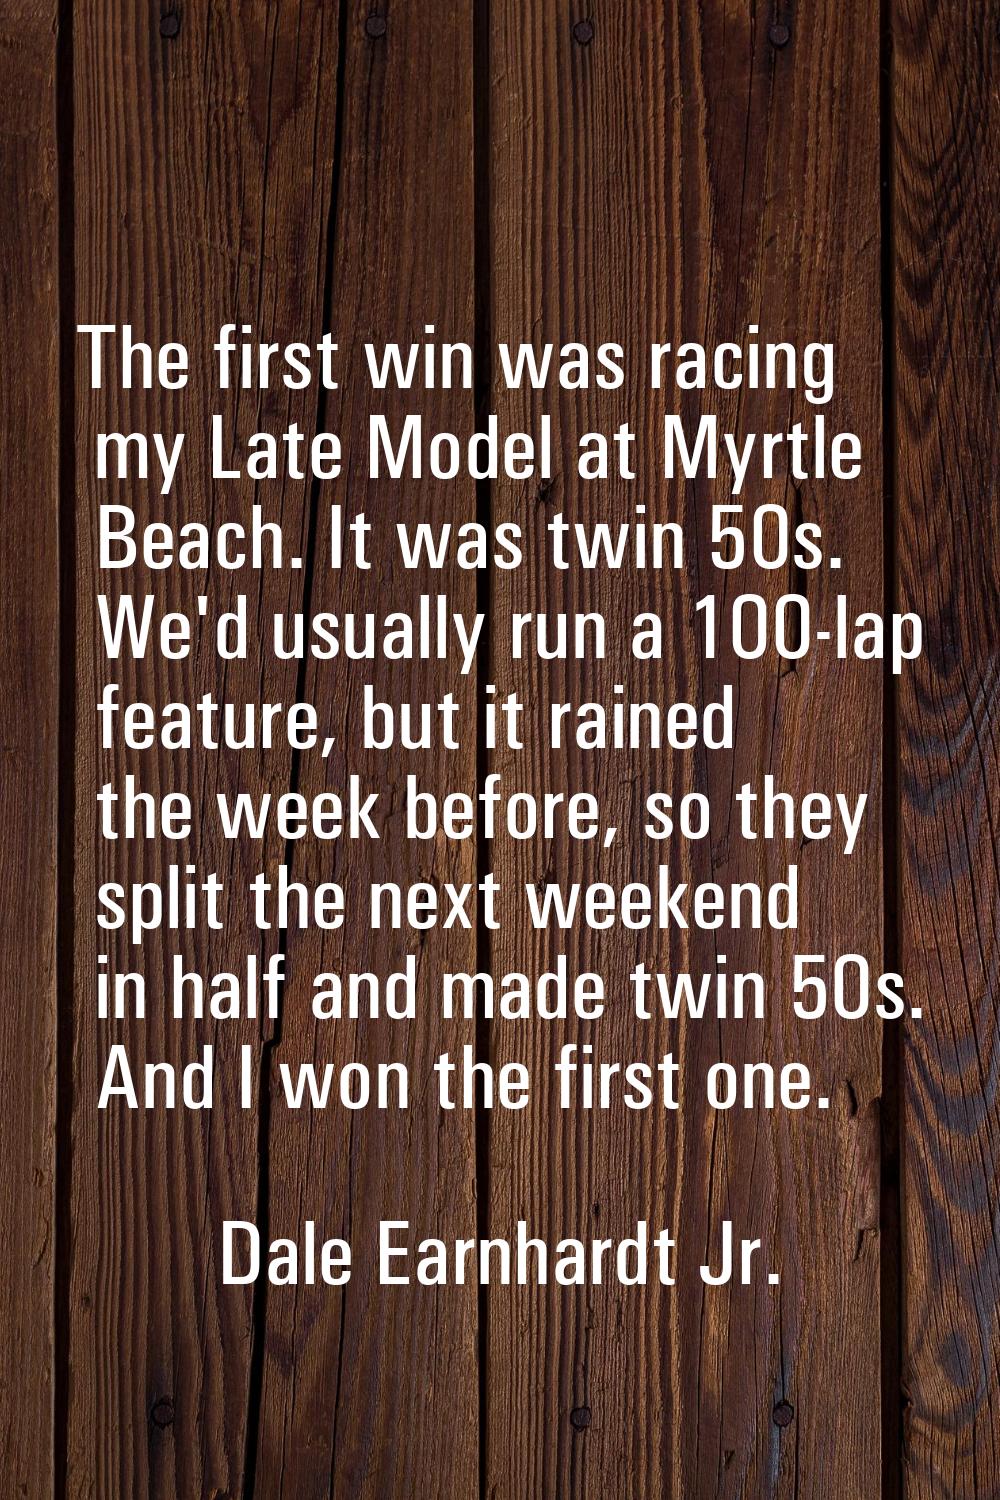 The first win was racing my Late Model at Myrtle Beach. It was twin 50s. We'd usually run a 100-lap